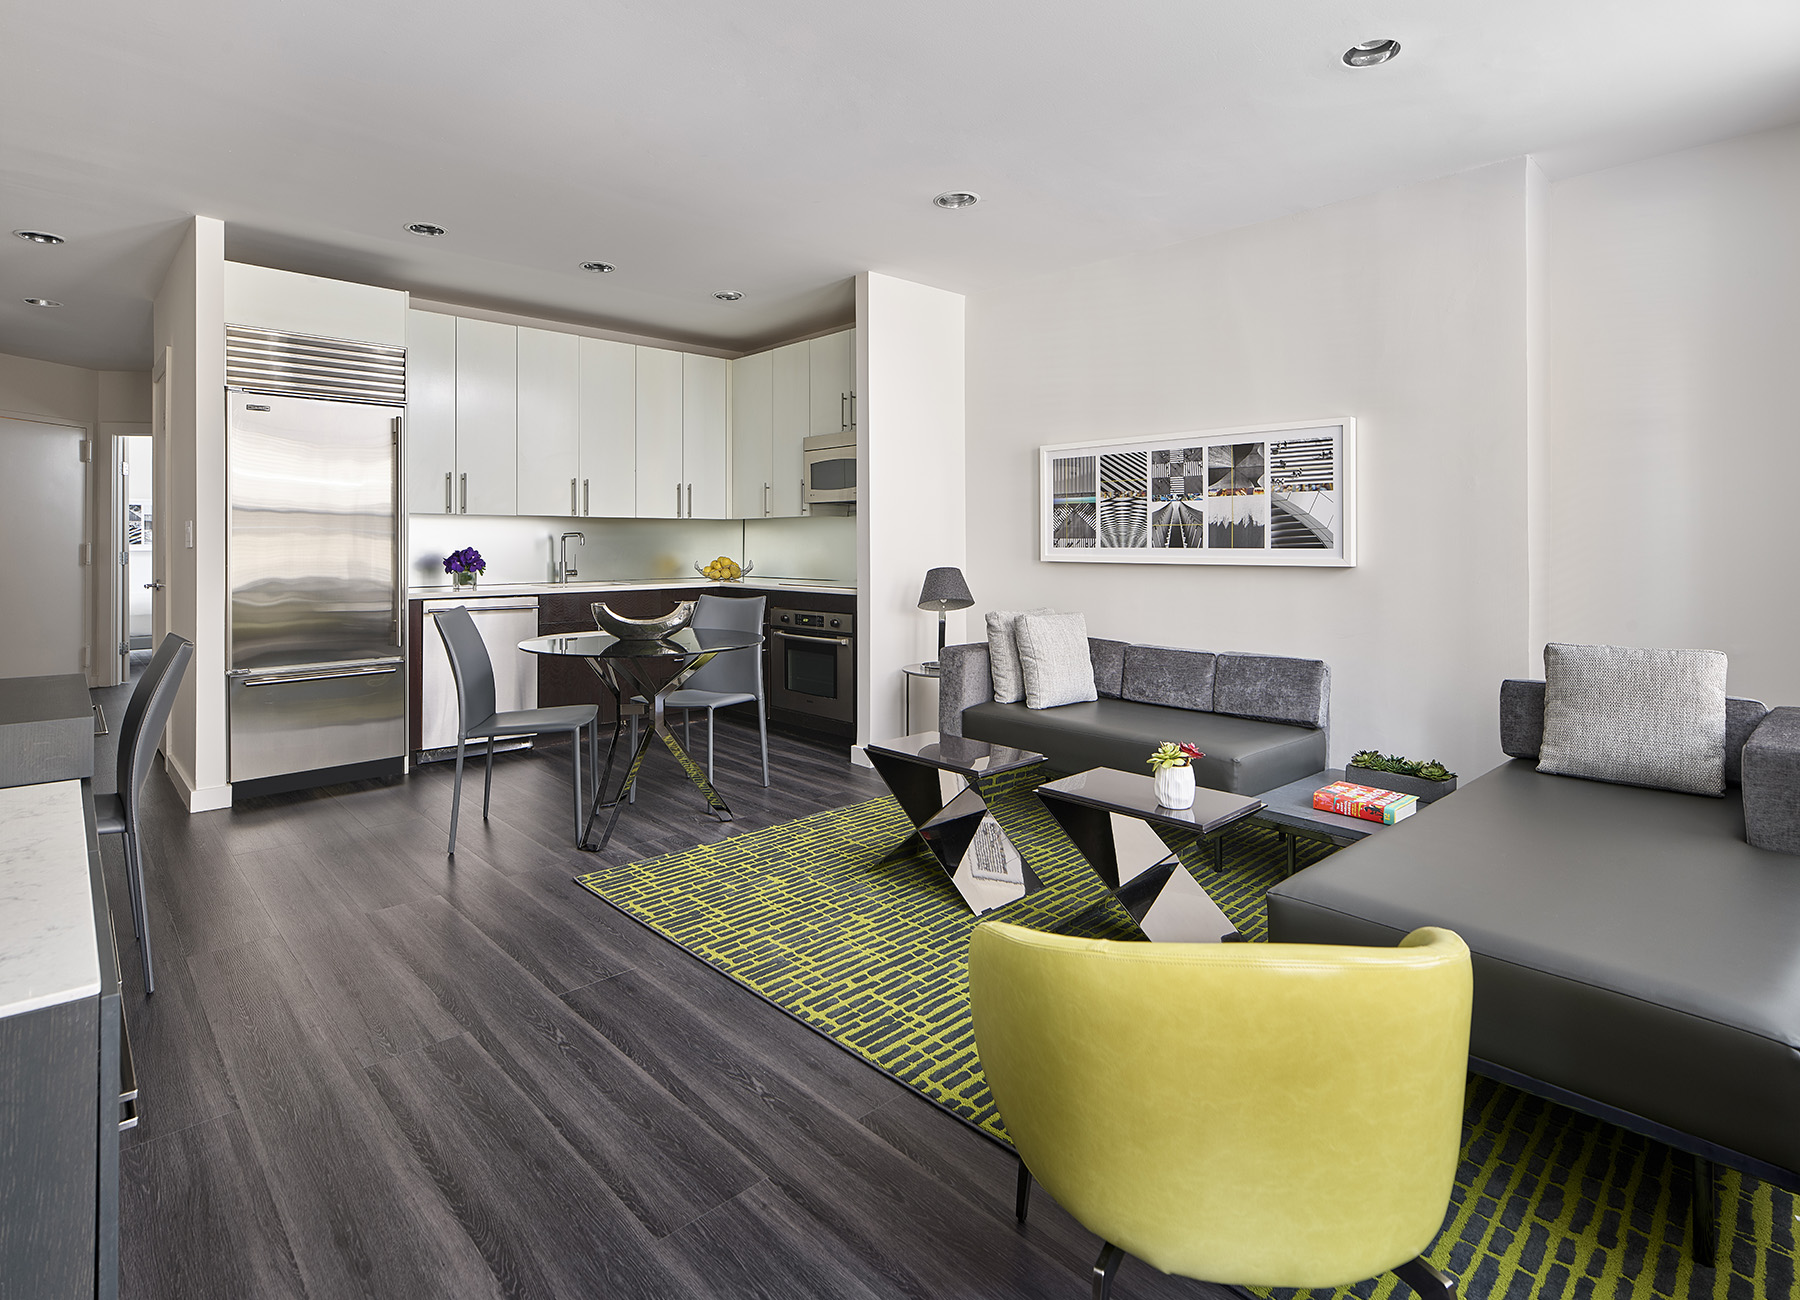 AKA Times Square premium suite living room and kitchen with green rug and modern yellow chair